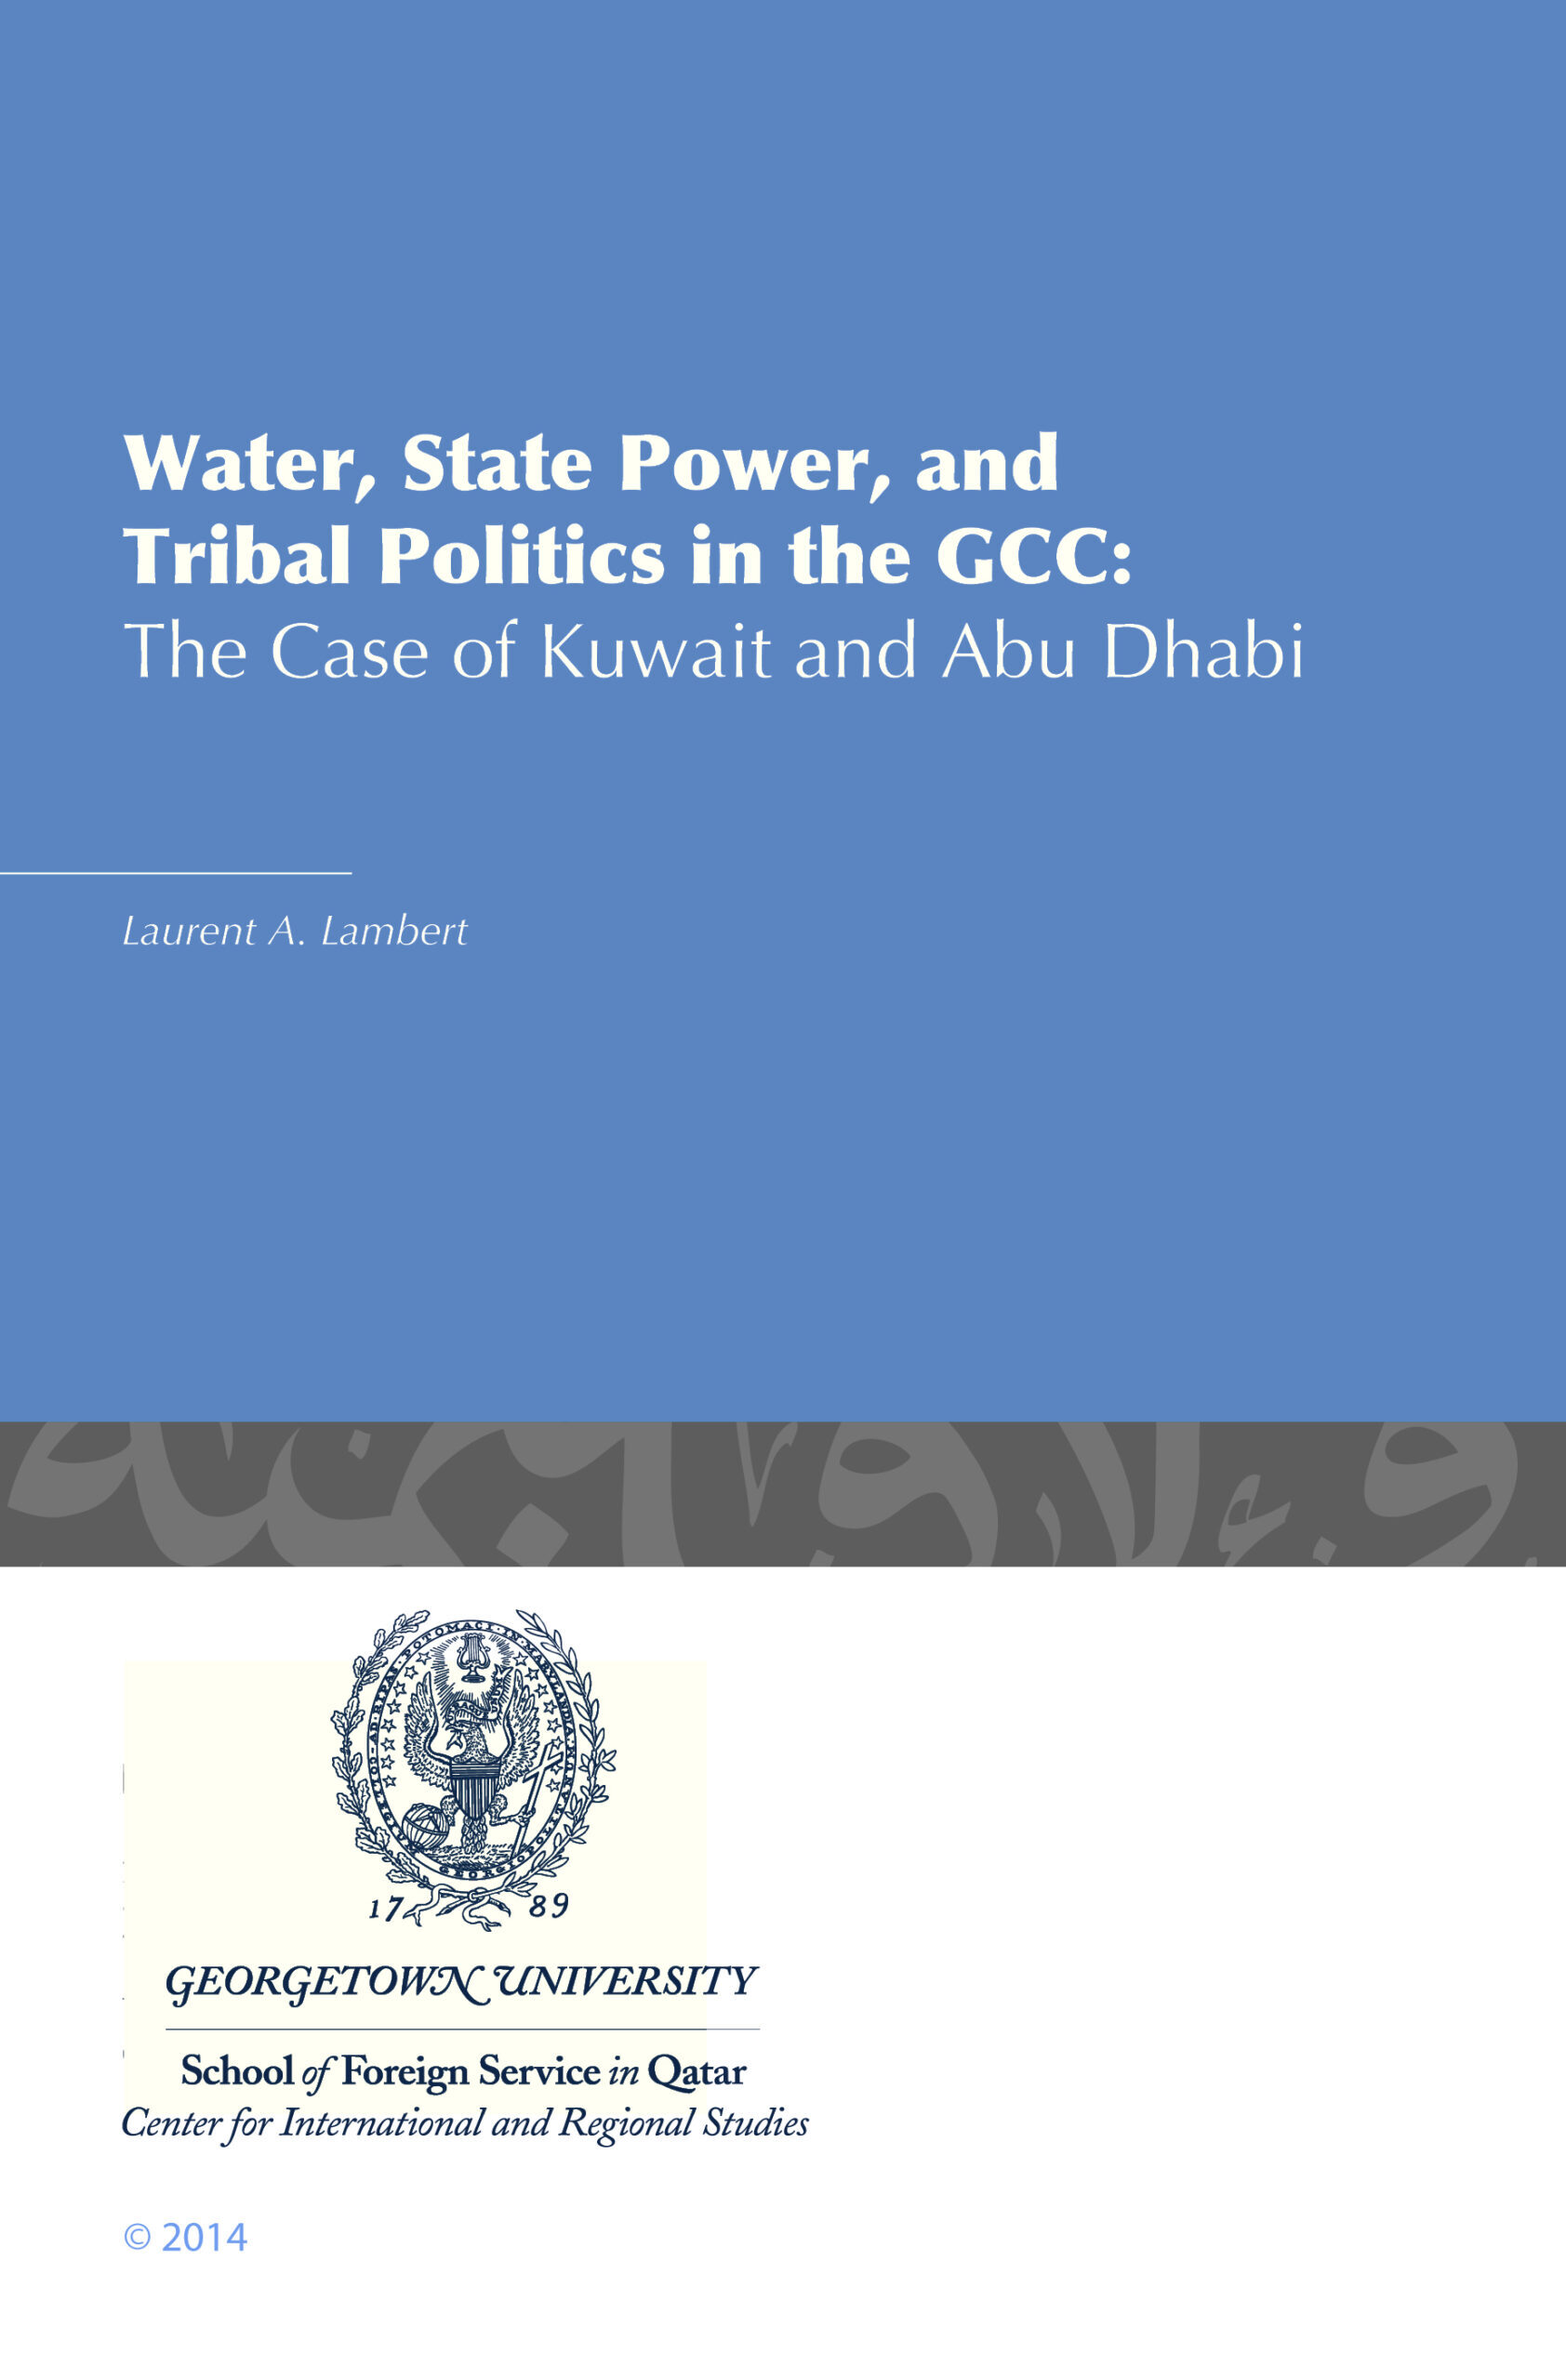 Water, State Power, and Tribal Politics in the GCC: The Case of Kuwait and Abu Dhabi